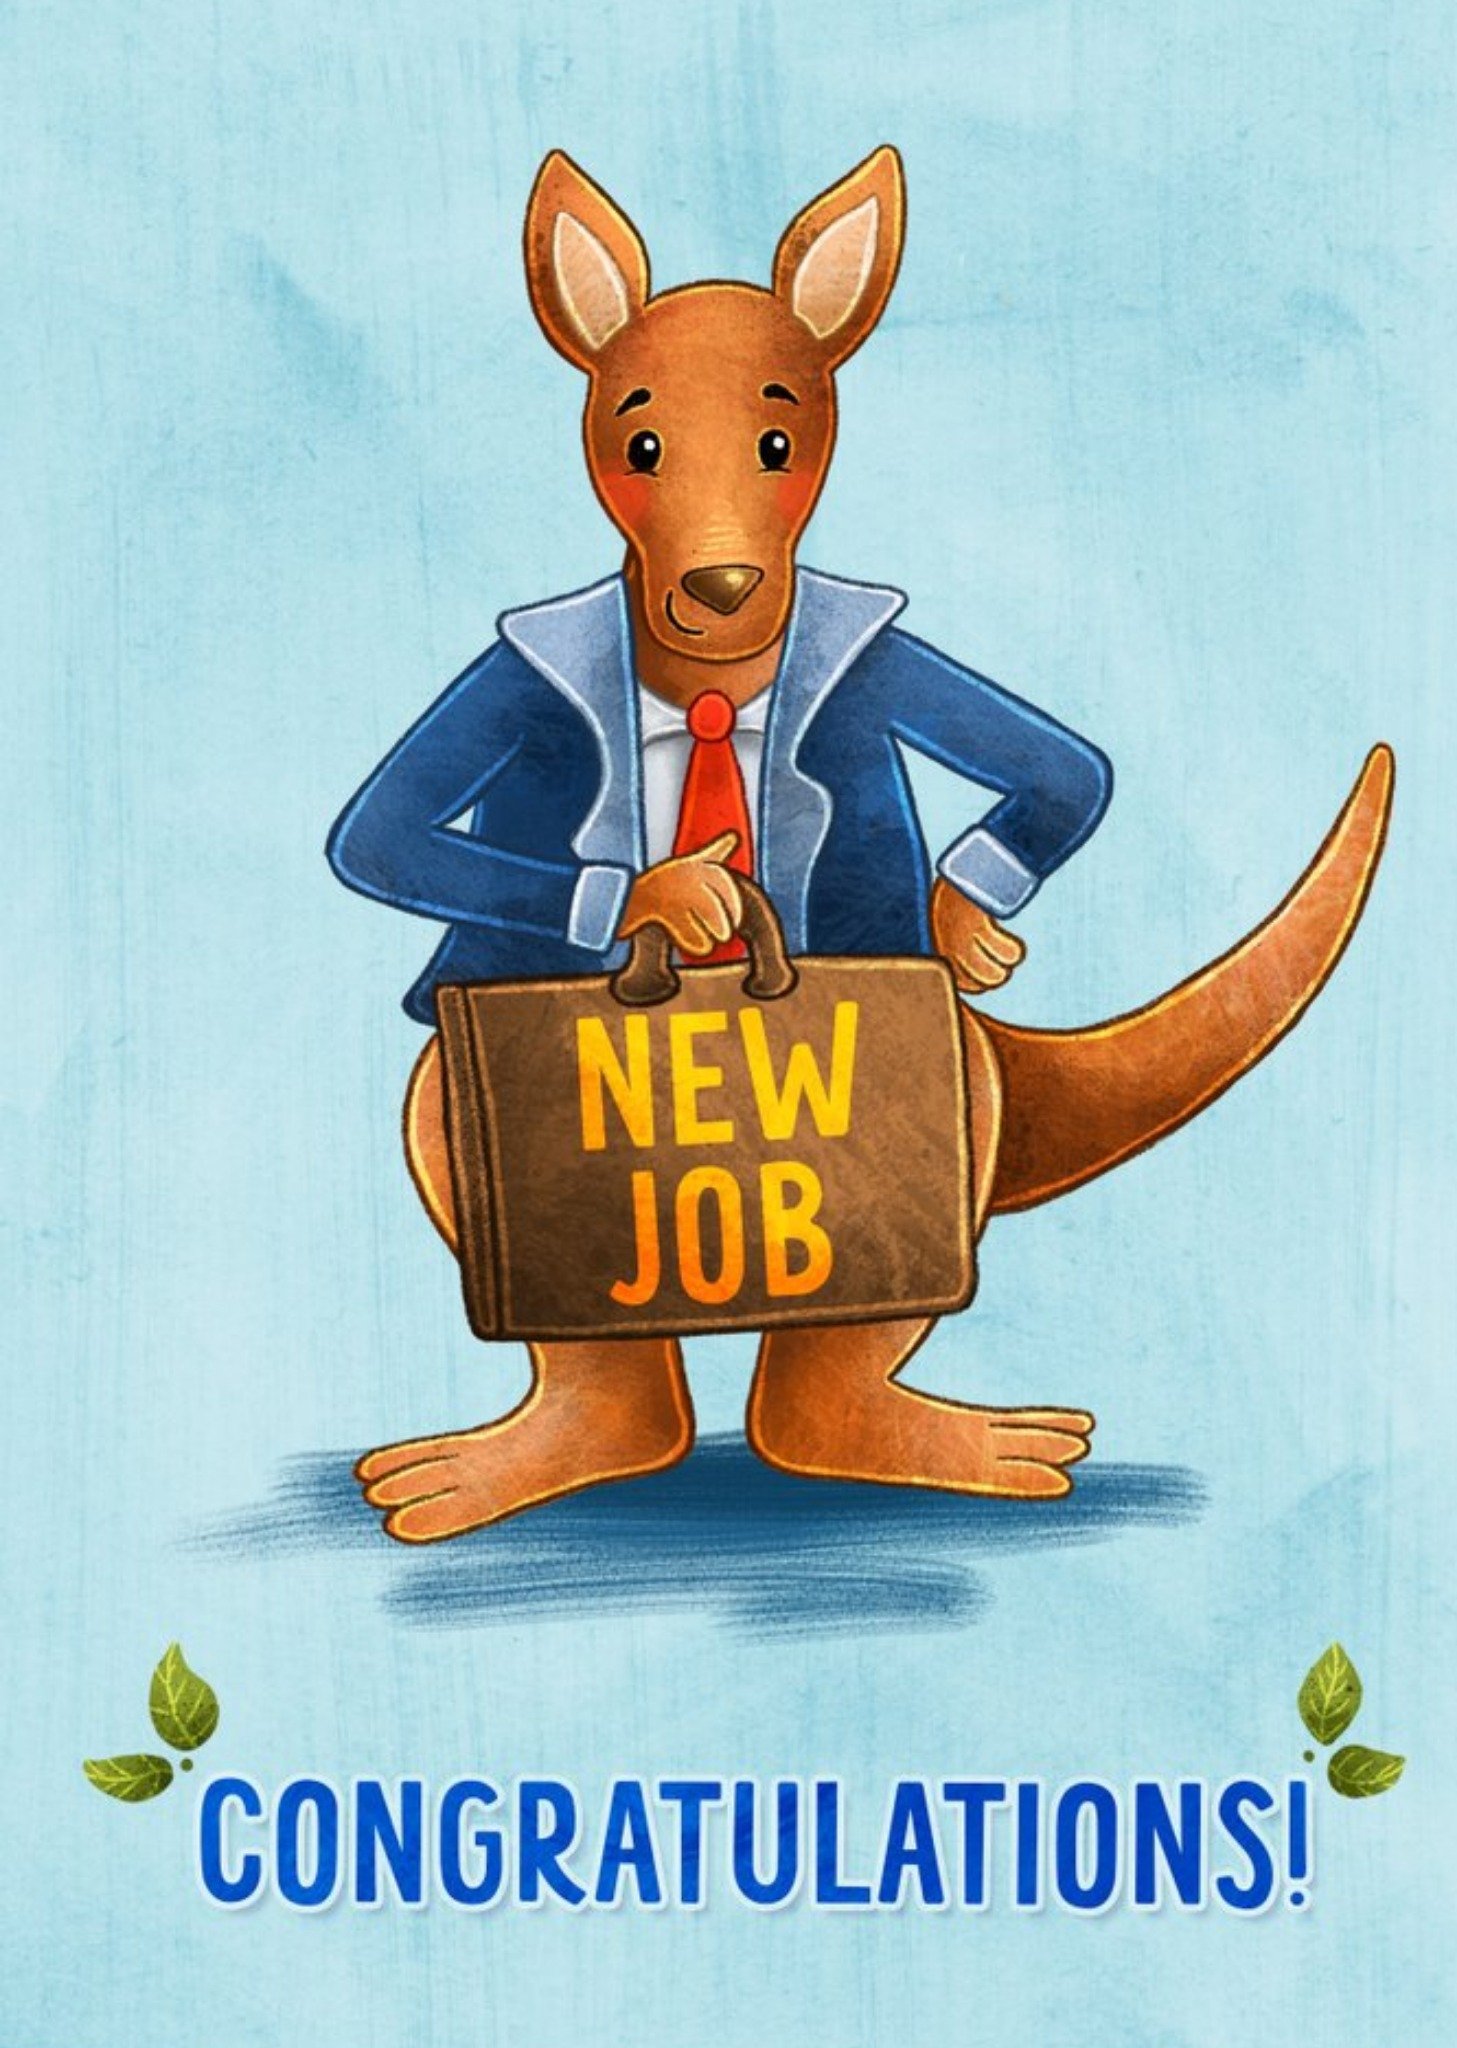 Moonpig Illustration Of A Kangeroo In A Suit Holding A Briefcase New Job Congratulations Card, Large